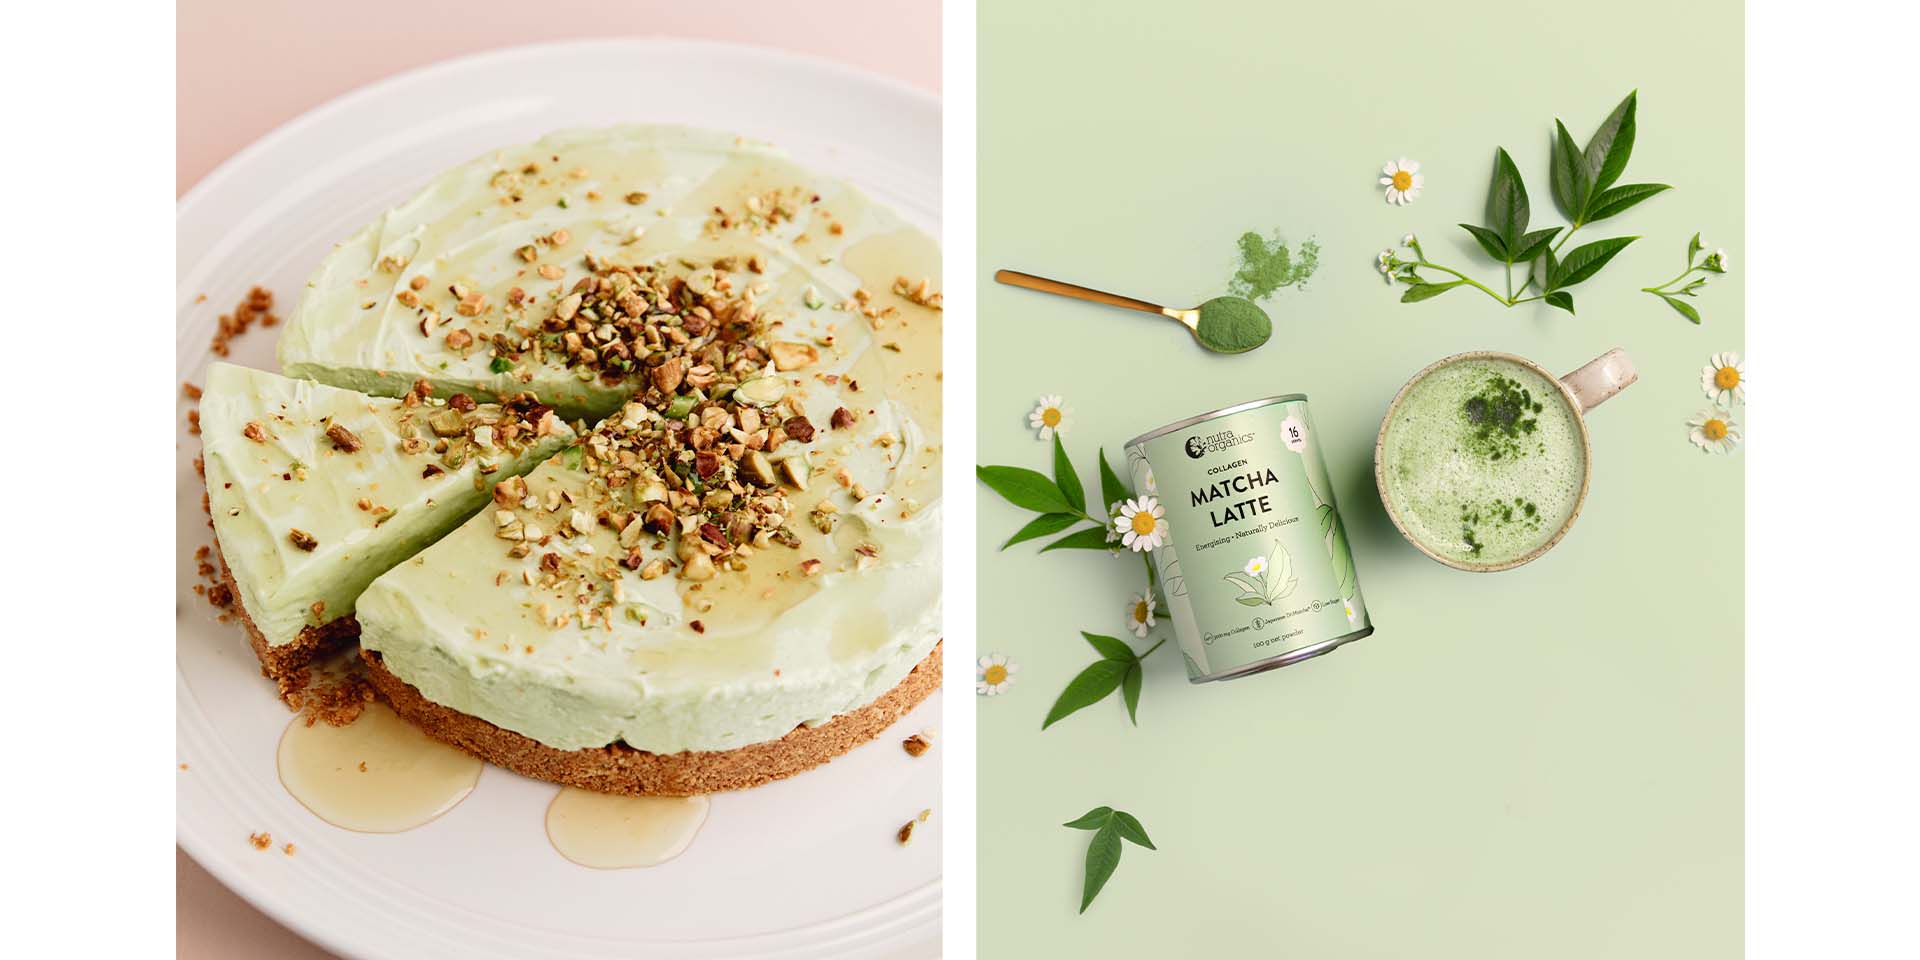 Collagen Matcha Latte with no bake cheesecake